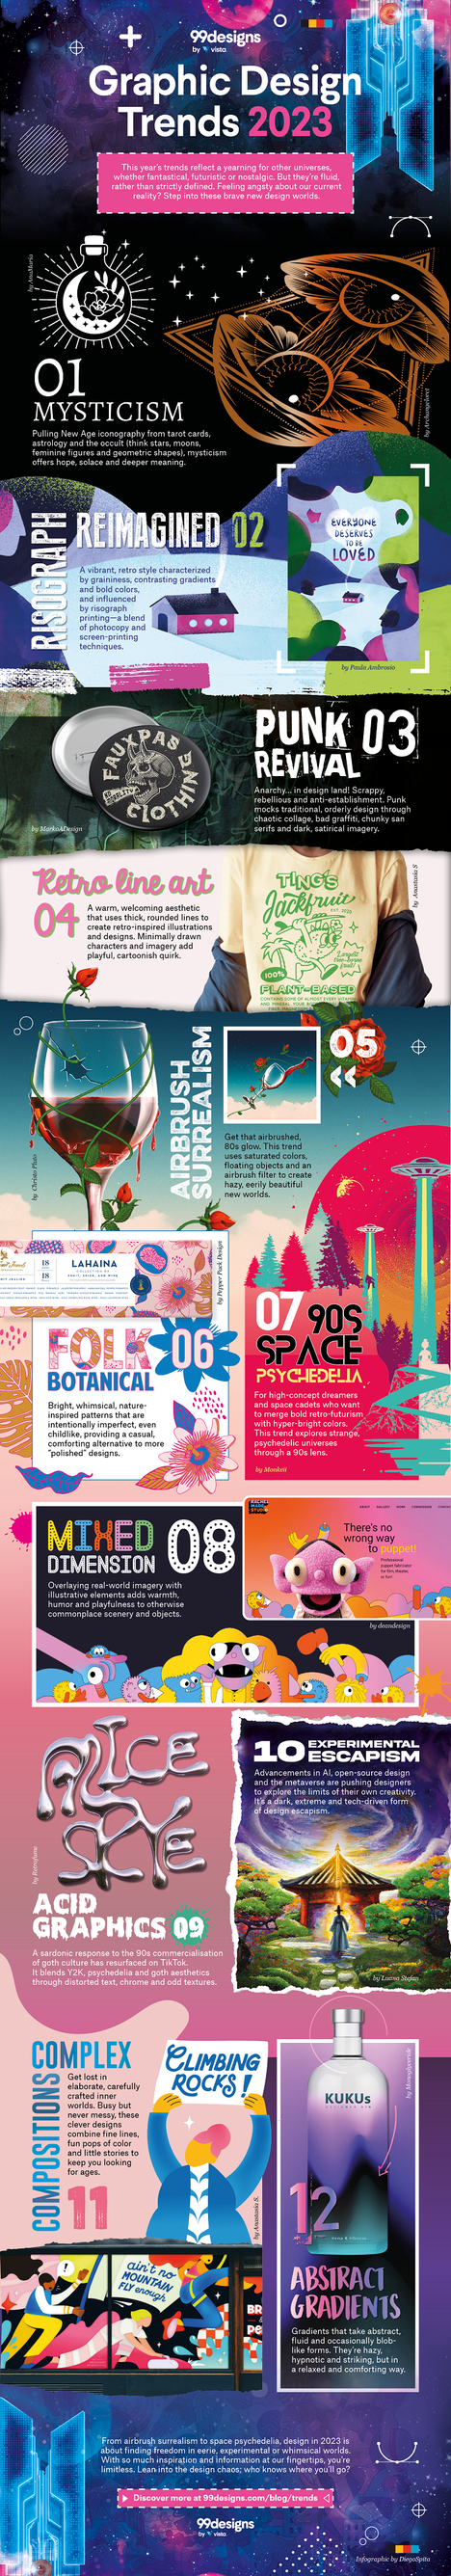 Graphic Design Trends for 2023